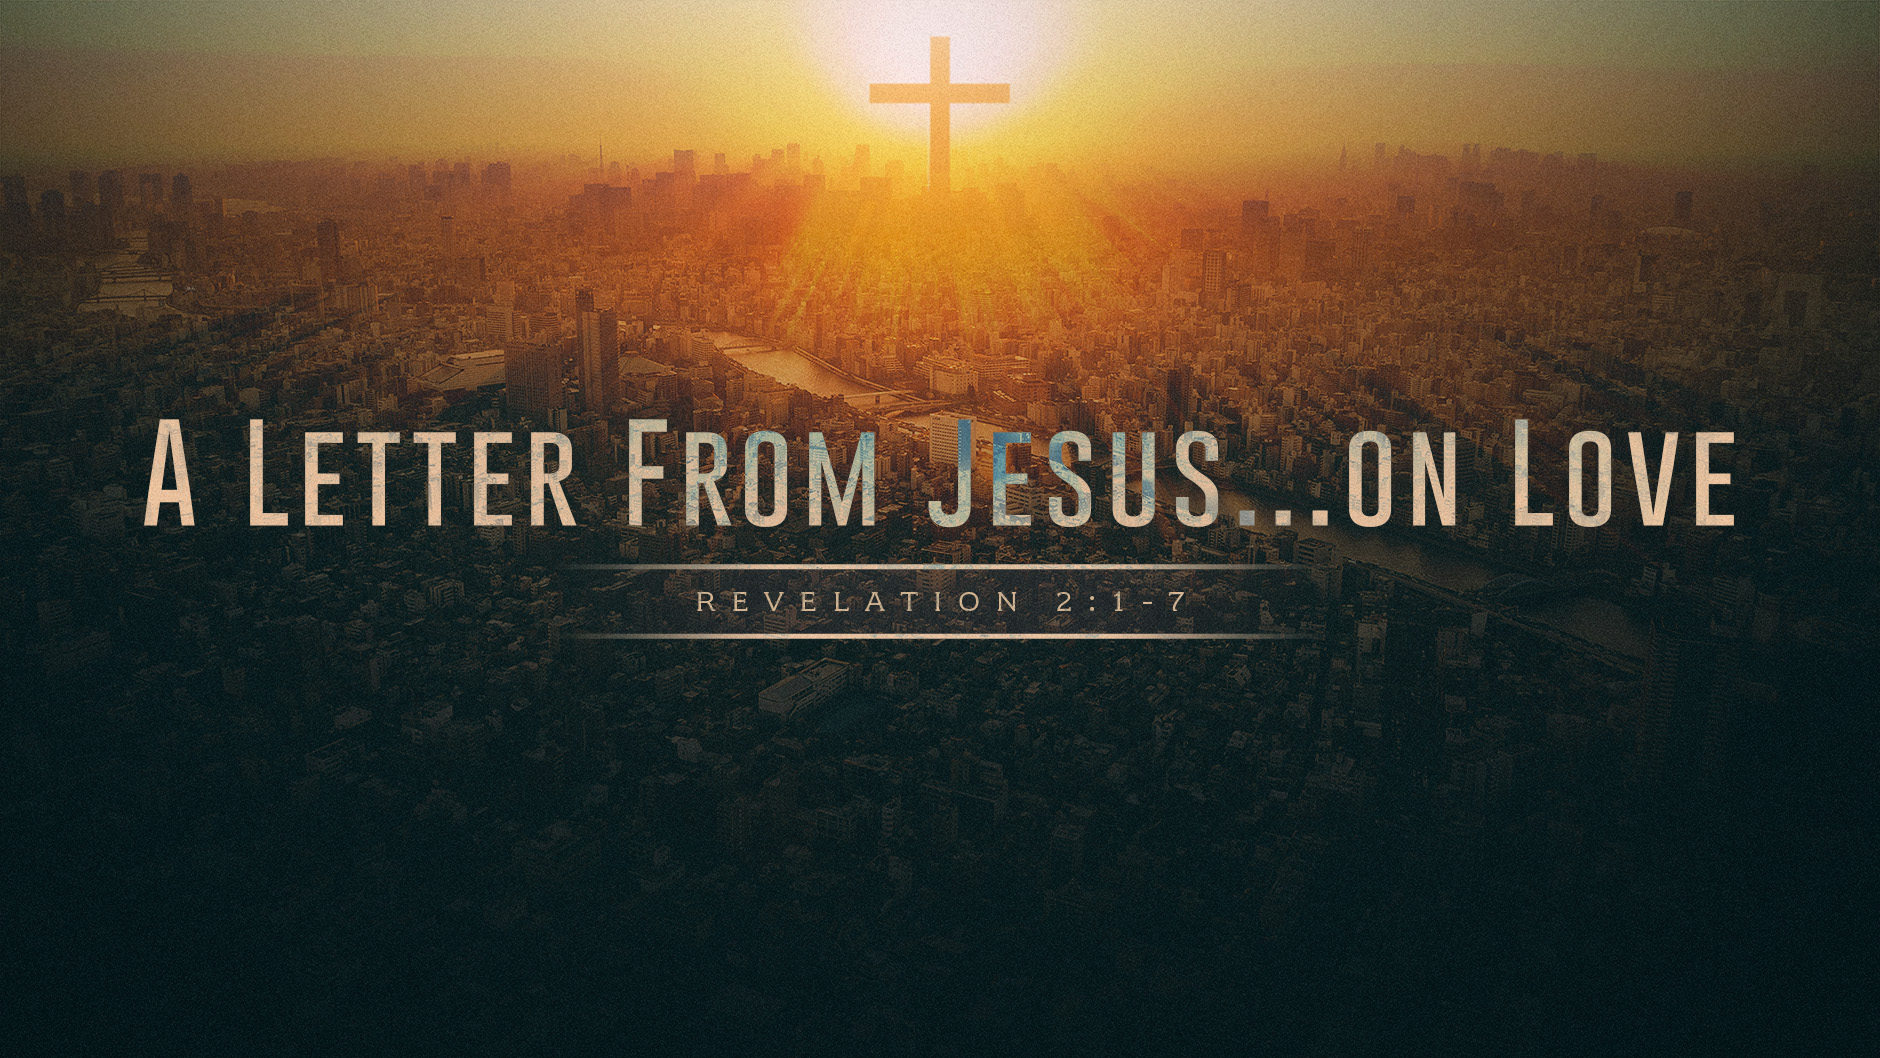 SERMON- A Letter From Jesus on Love